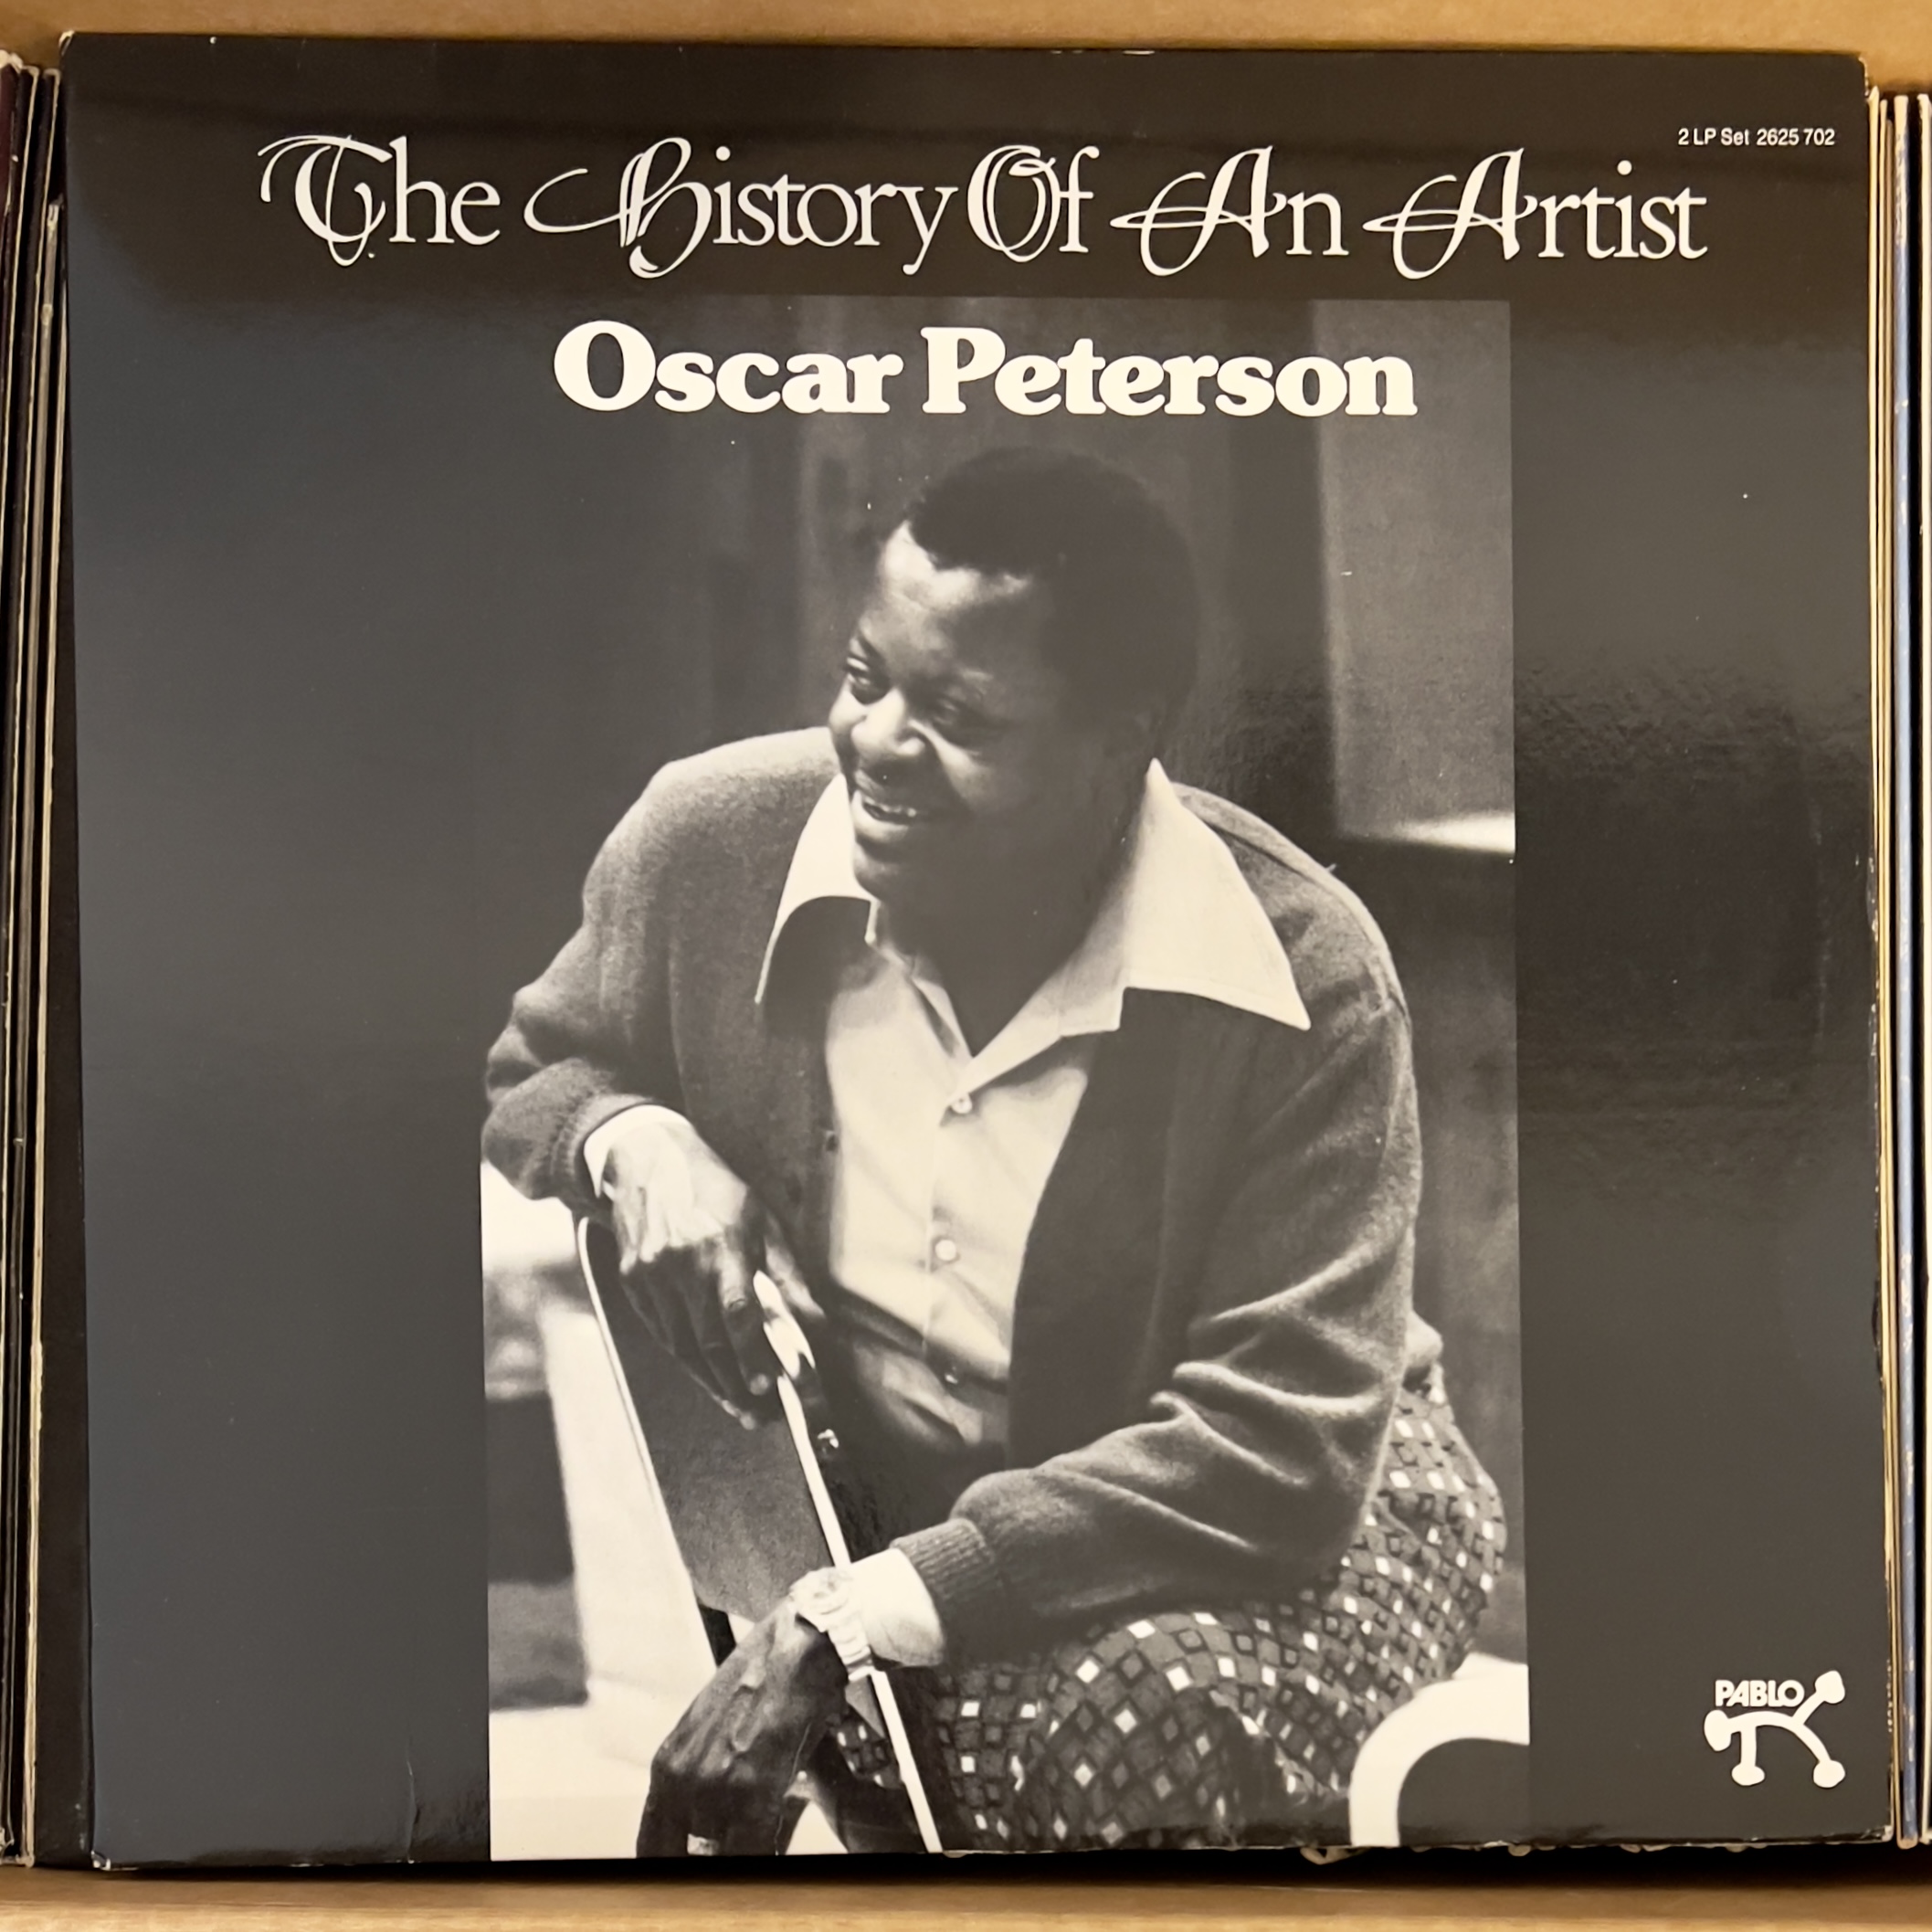 The History Of An Artist by Oscar Peterson